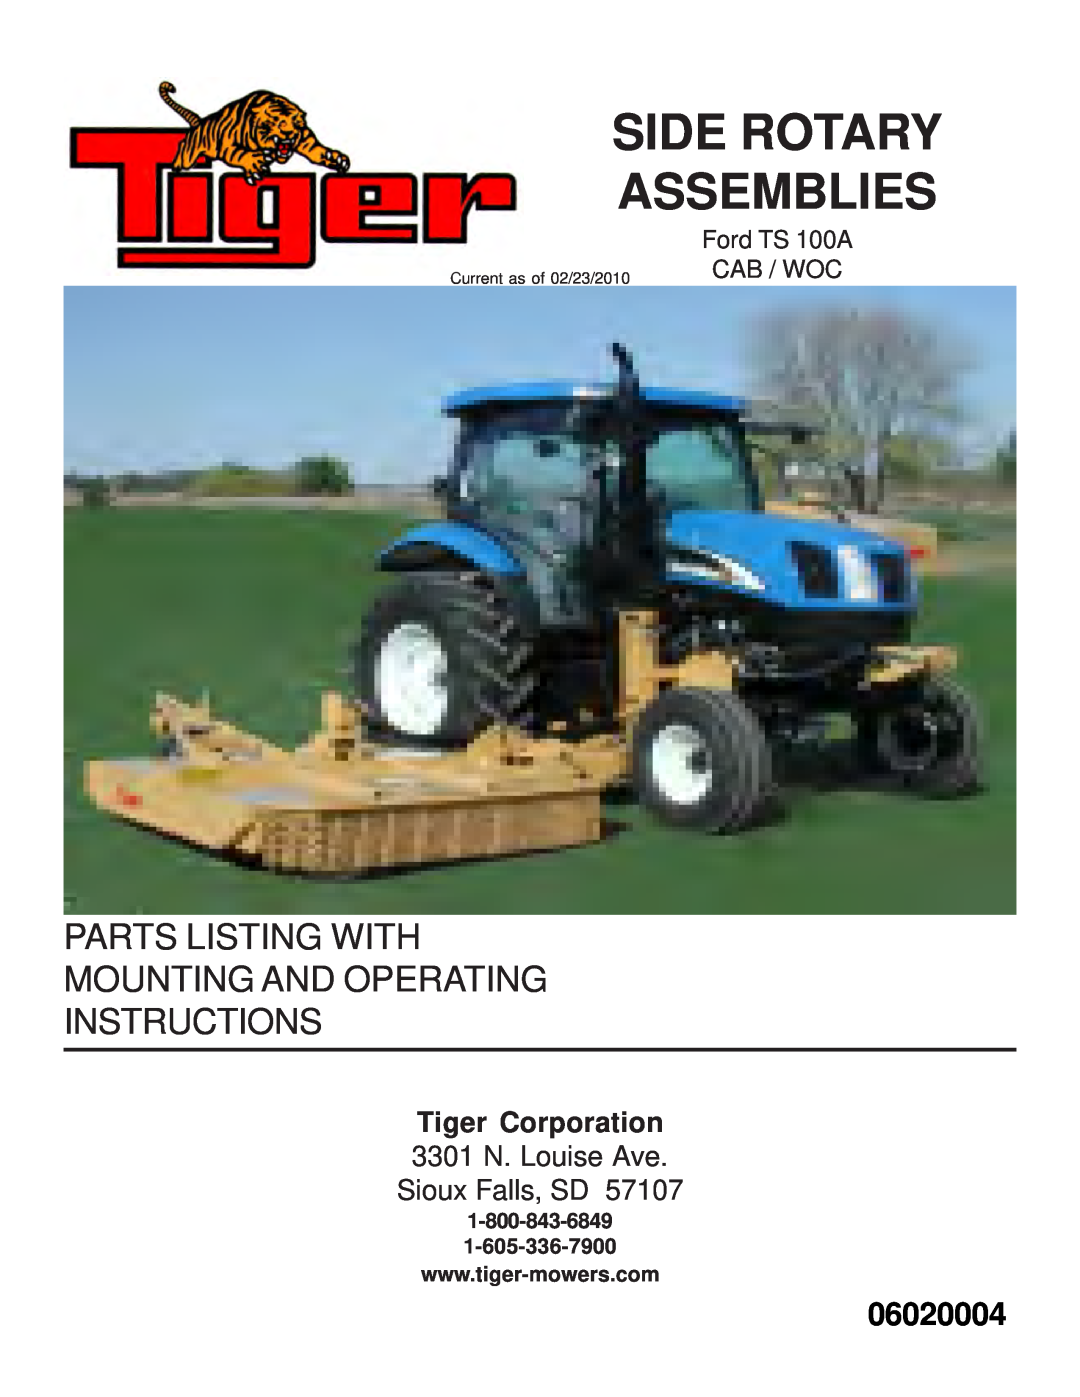 Tiger Products Co., Ltd TS 100A manual 06020004, Tiger Corporation, 3301 N. Louise Ave Sioux Falls, SD 